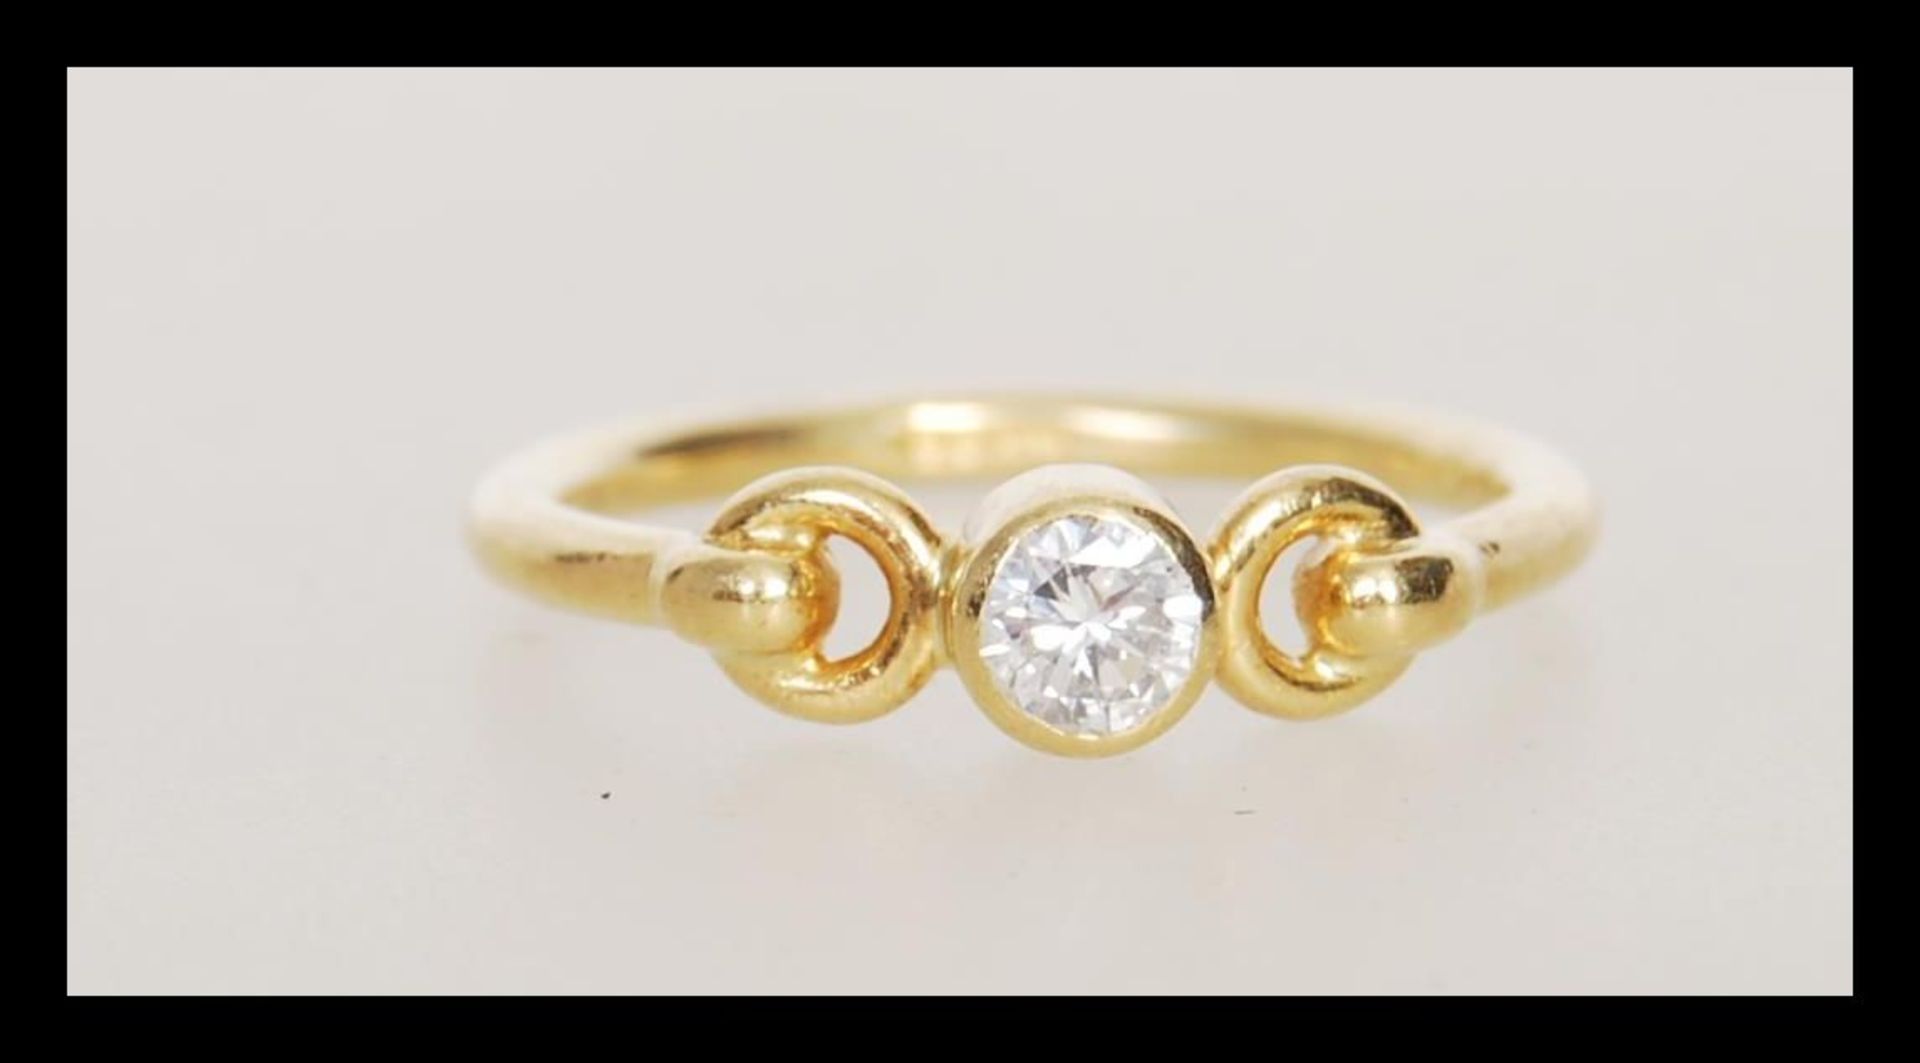 A hallmarked 18ct gold ring set bezel set with a brilliant cut diamond with decorative looped